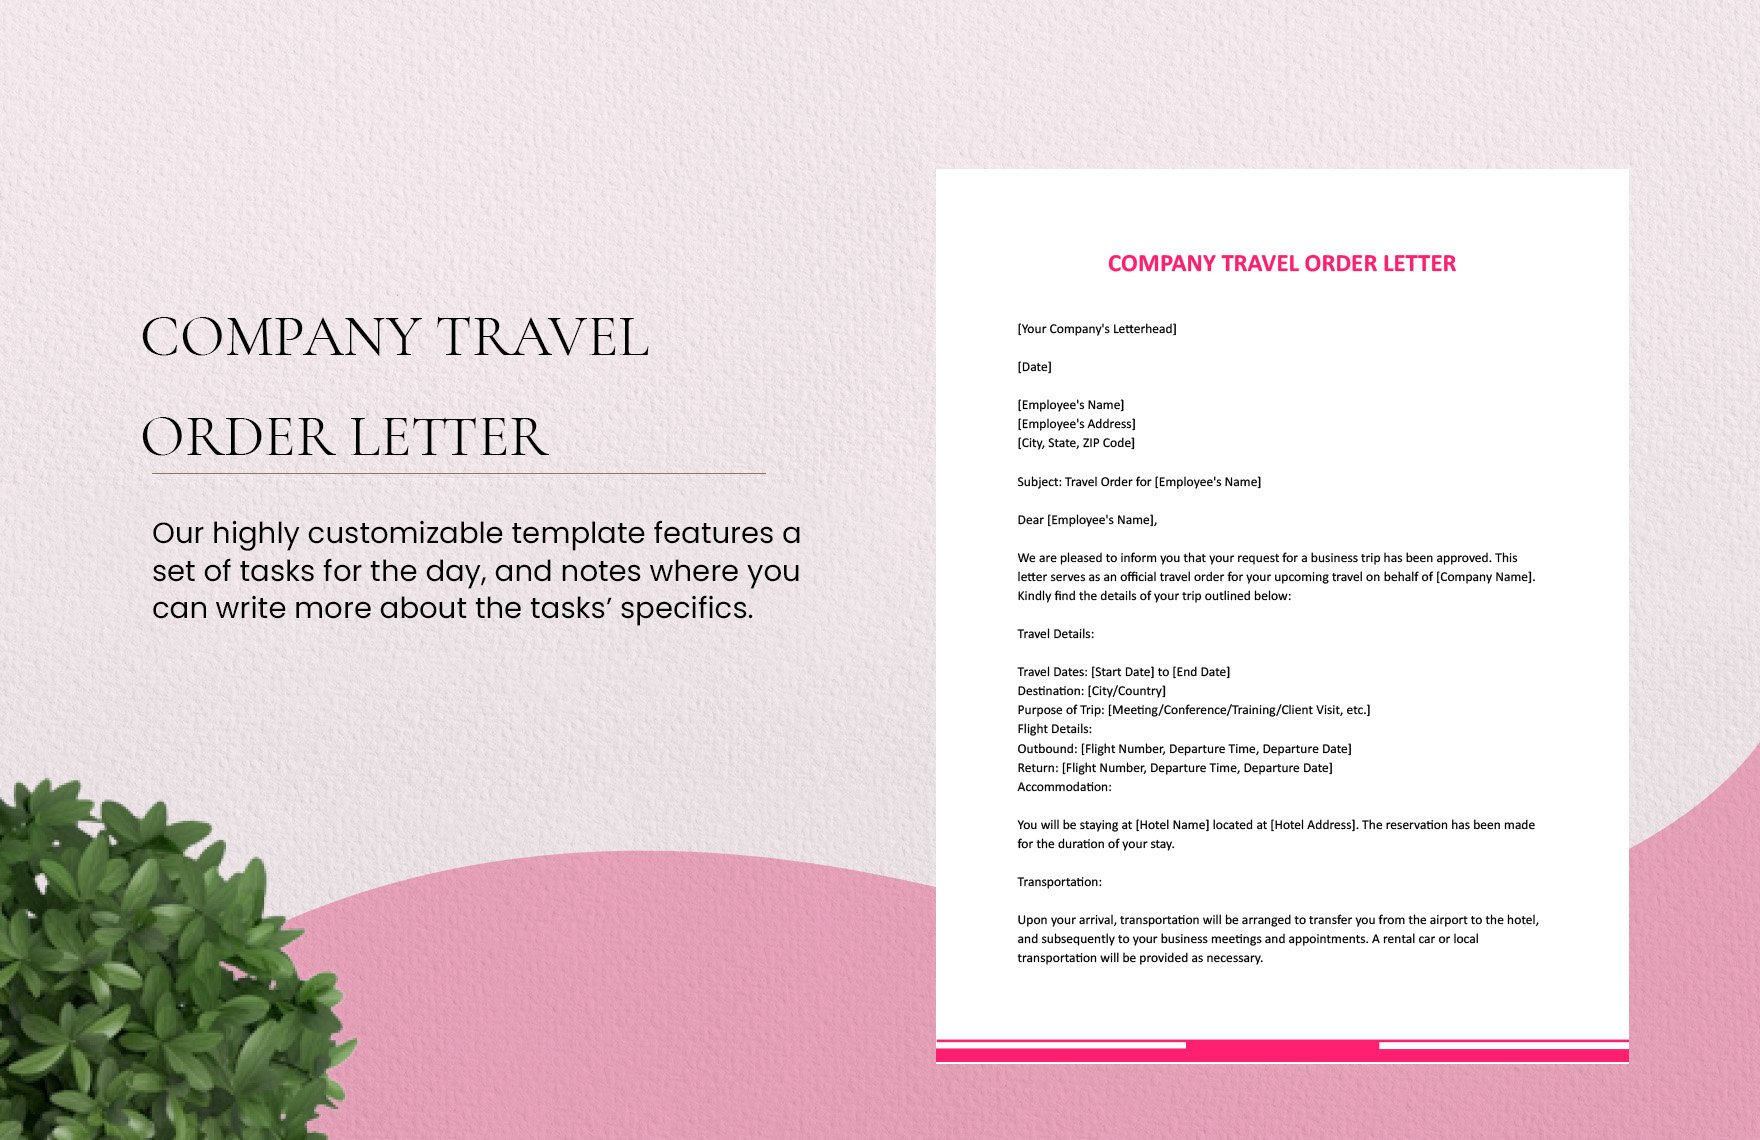 Company Travel Order Letter in Word, Google Docs, Apple Pages